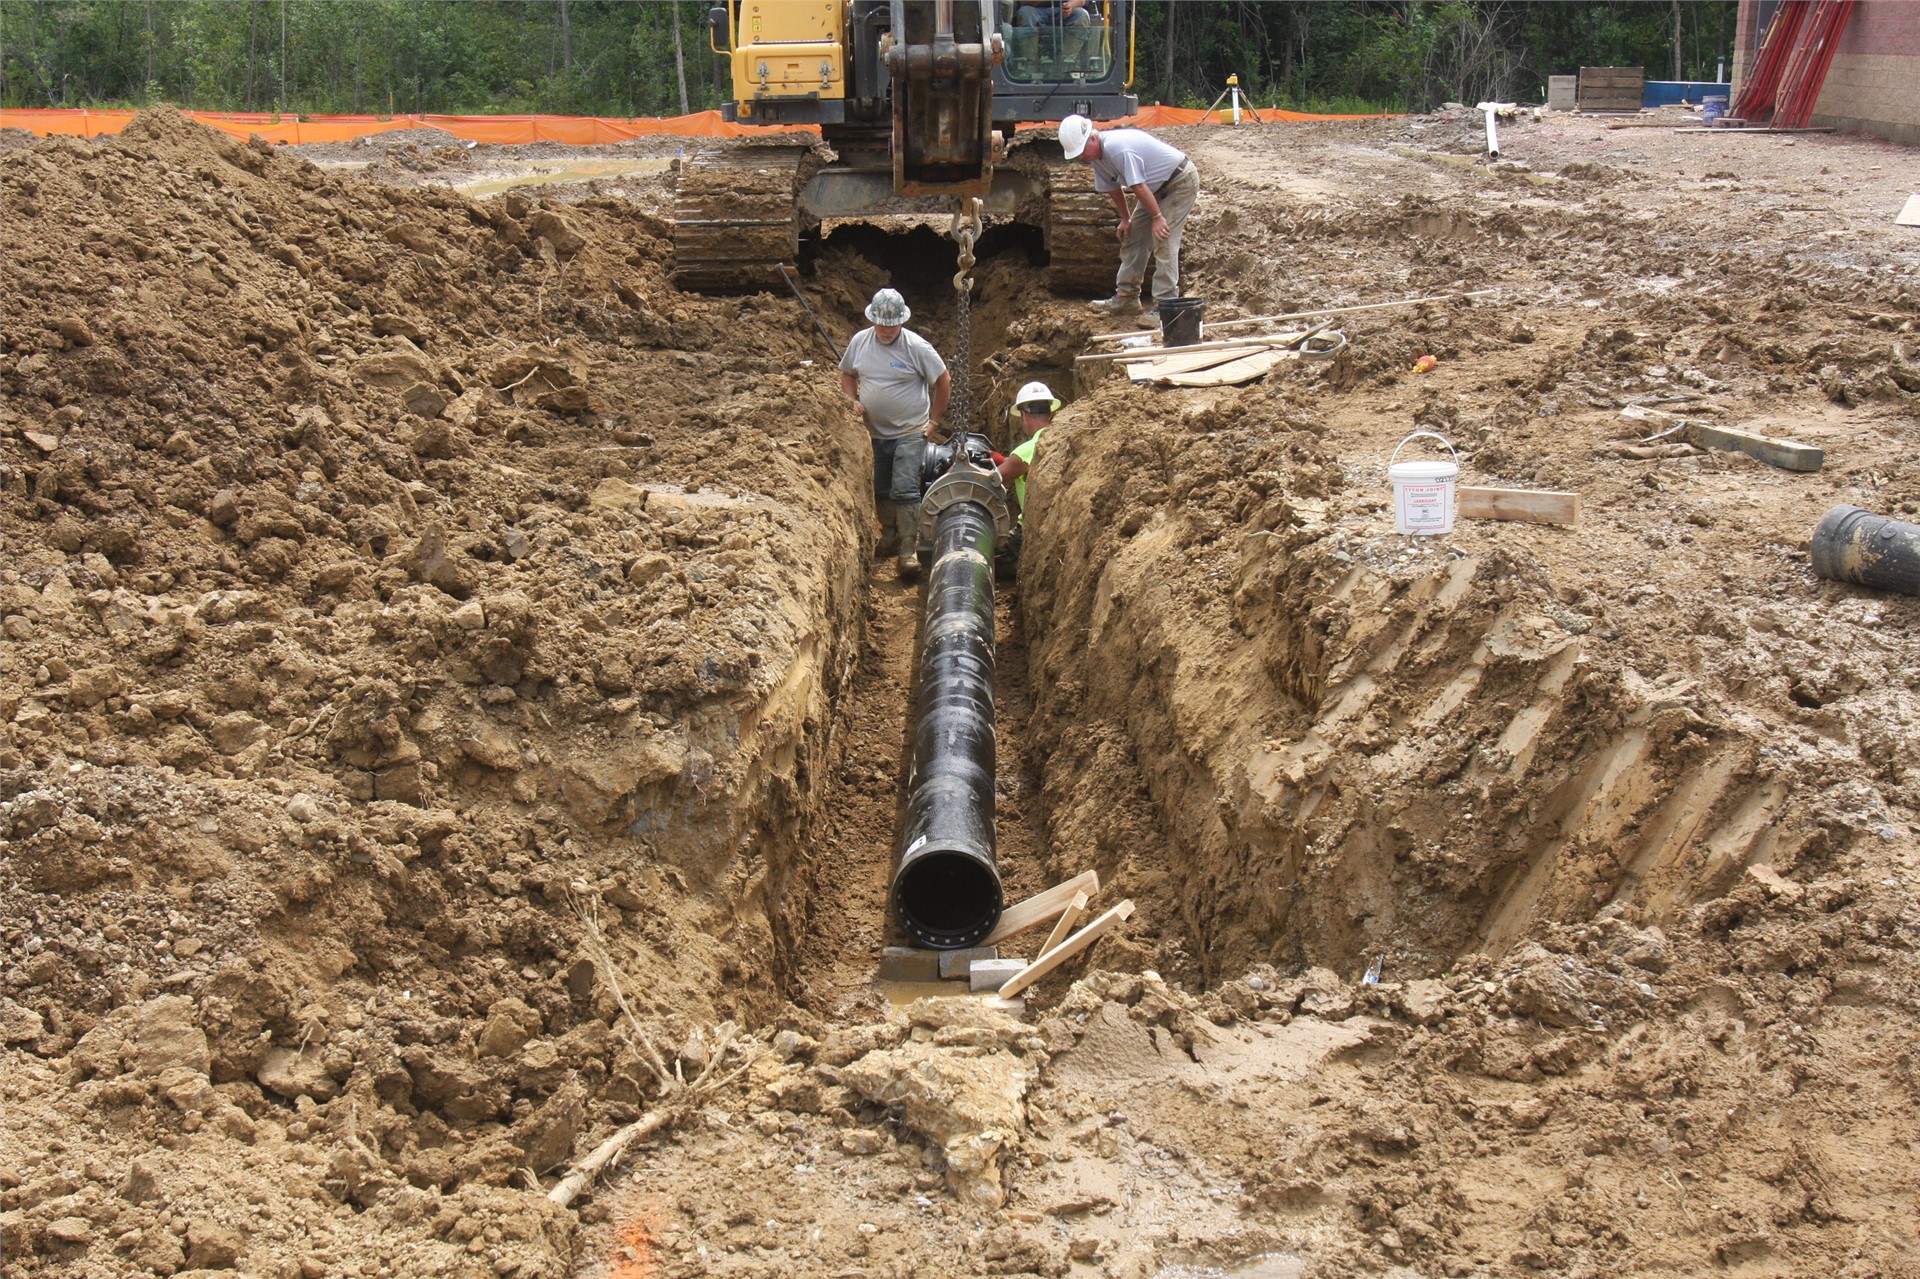 Construction workers installing pipelines in the ground under location of parking lot